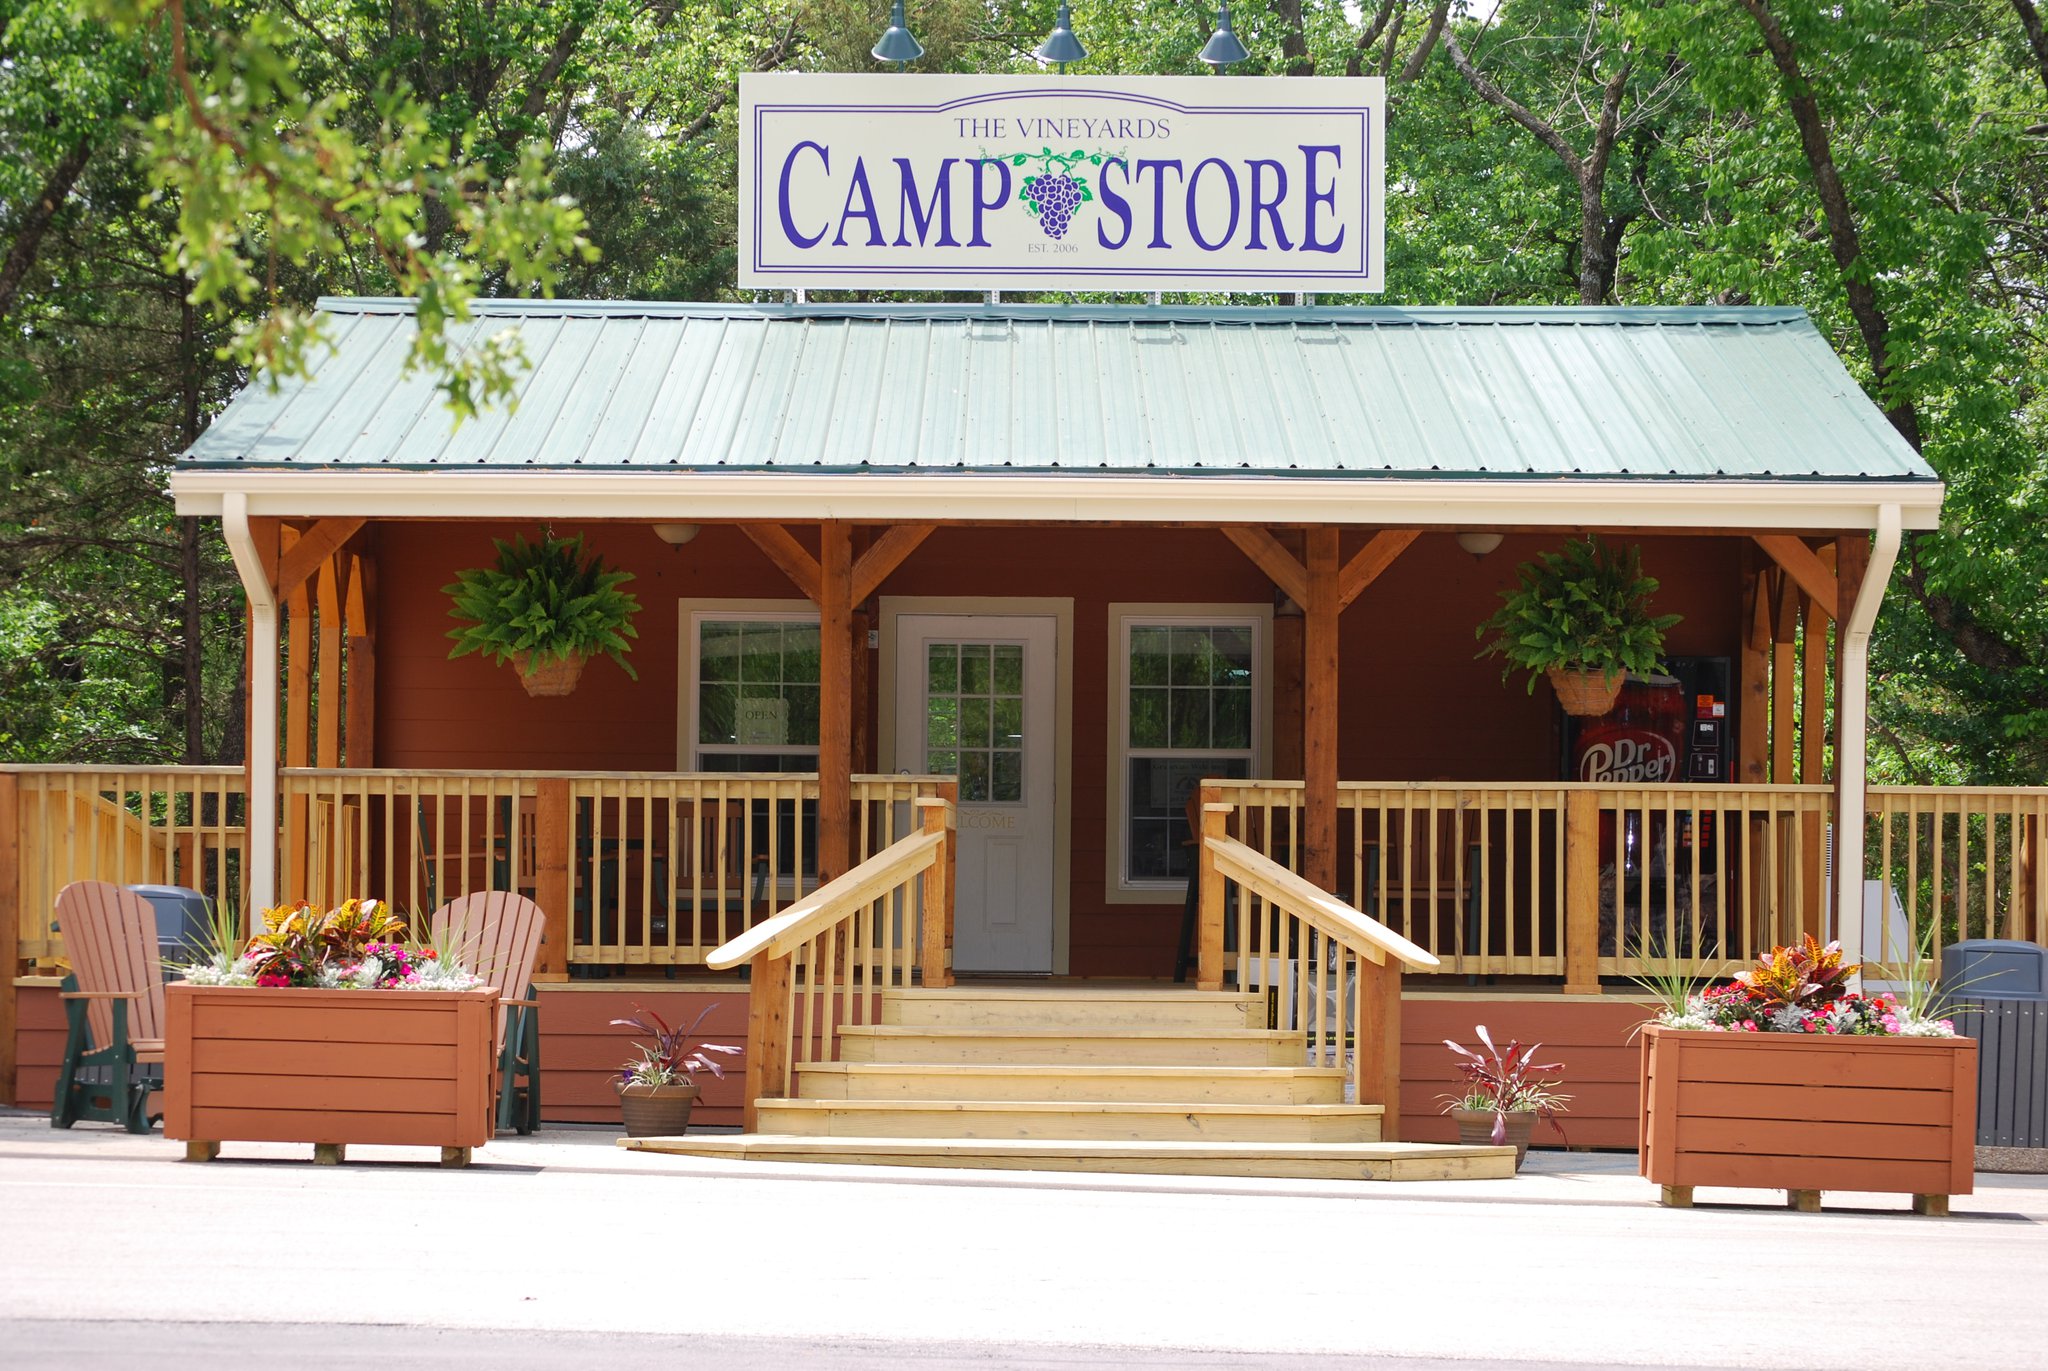 Camp stor building